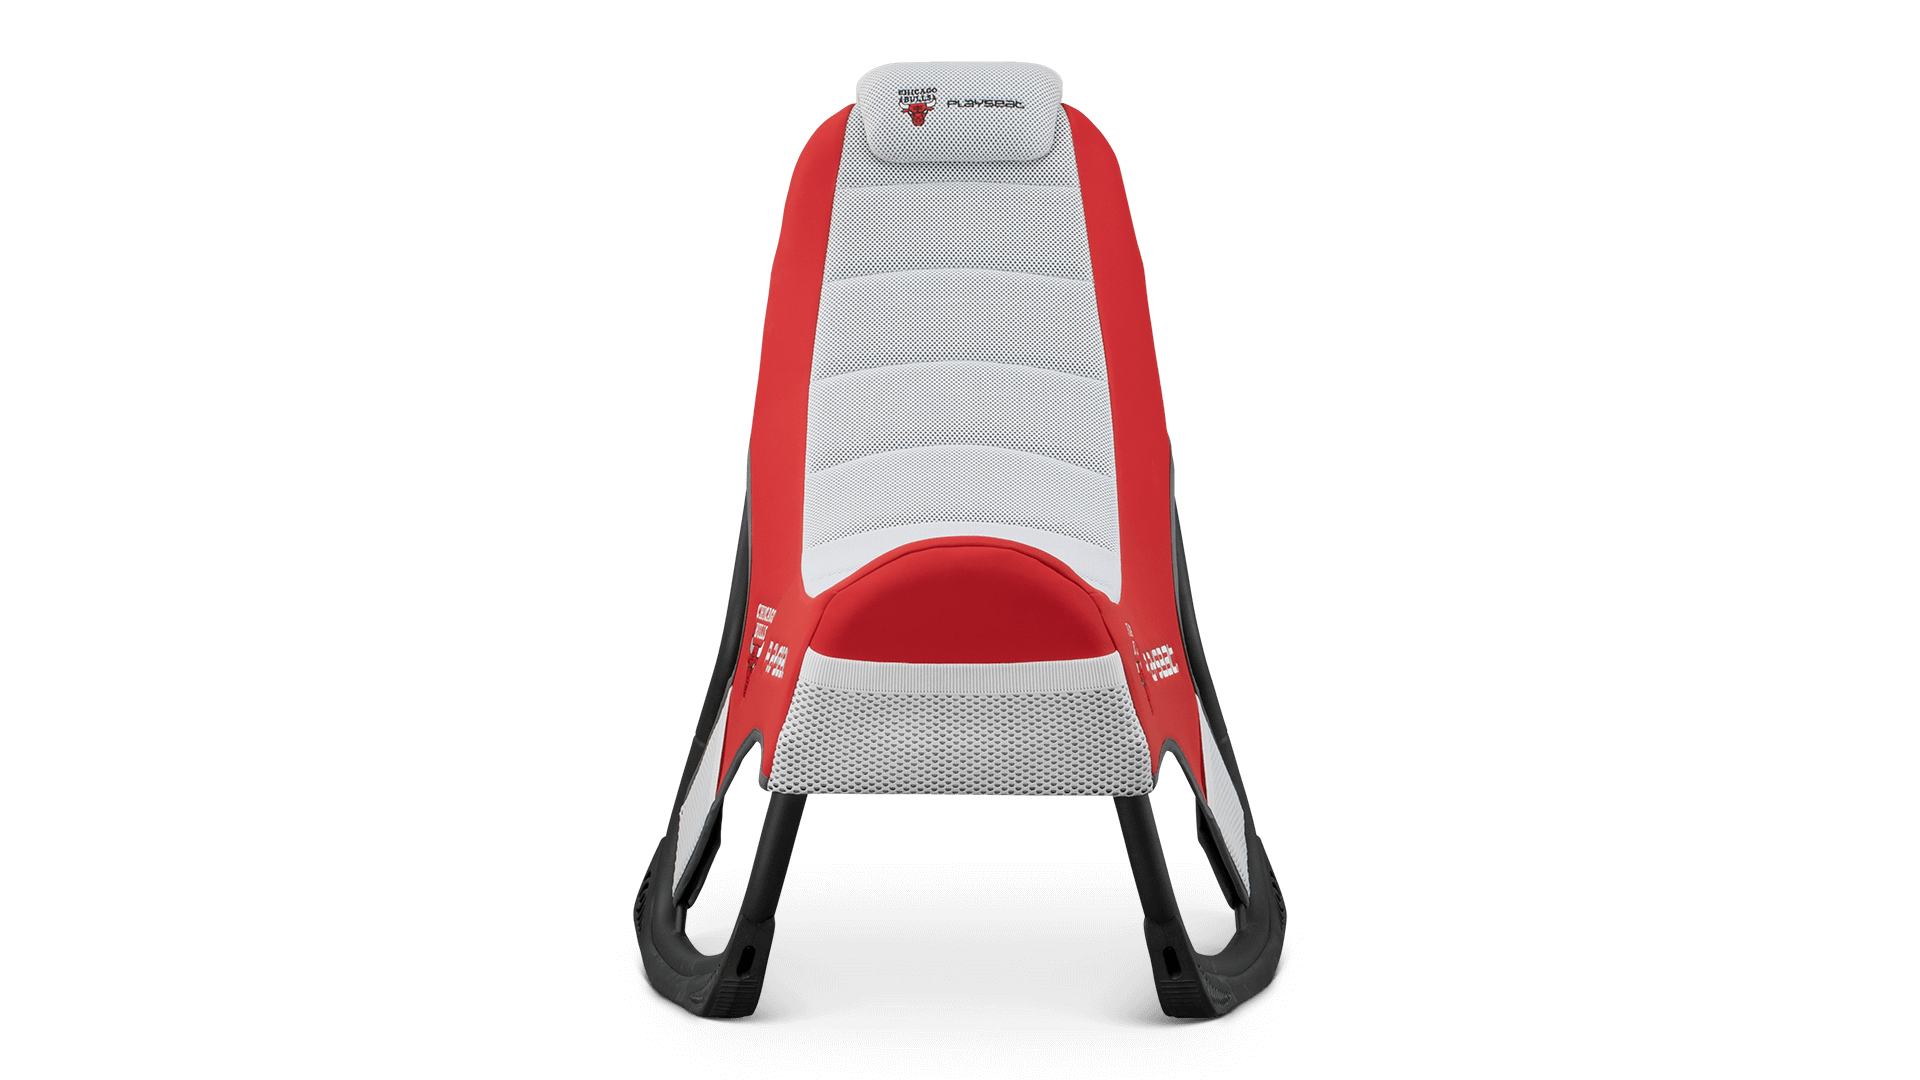 playseat-go-nba-chicago-bulls-gaming-seat-front-view-1920x1080.png